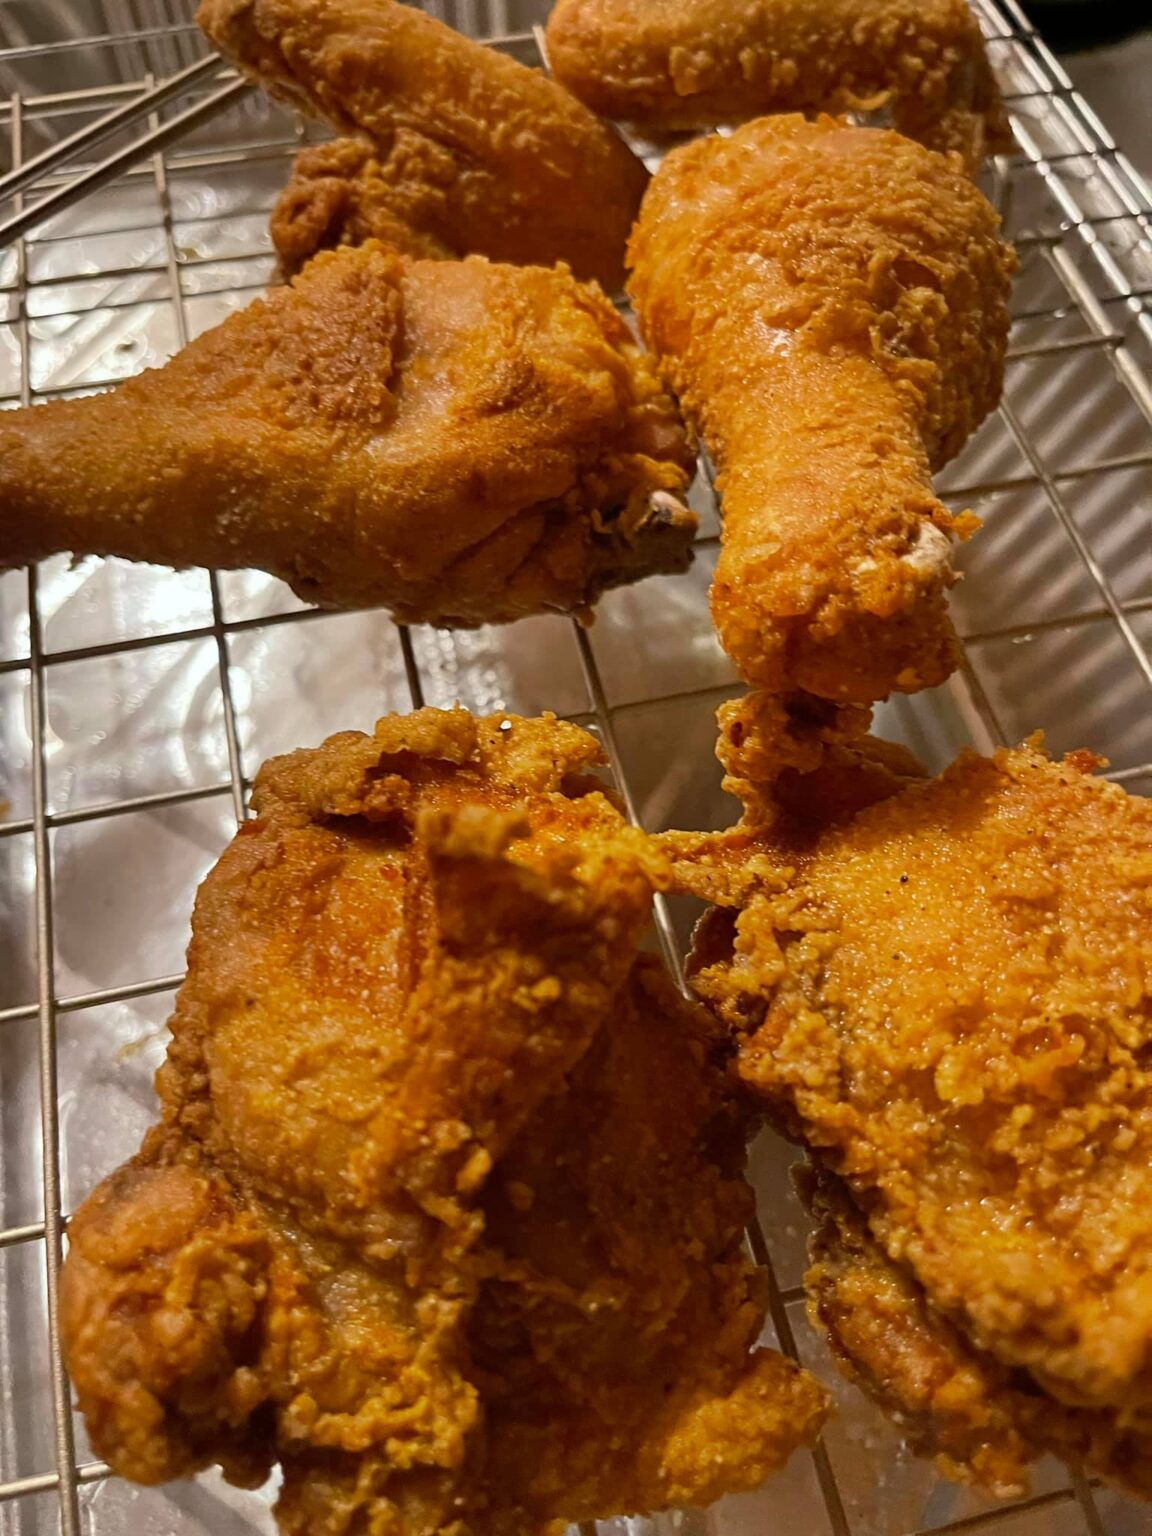 Spicy Southern fried chicken